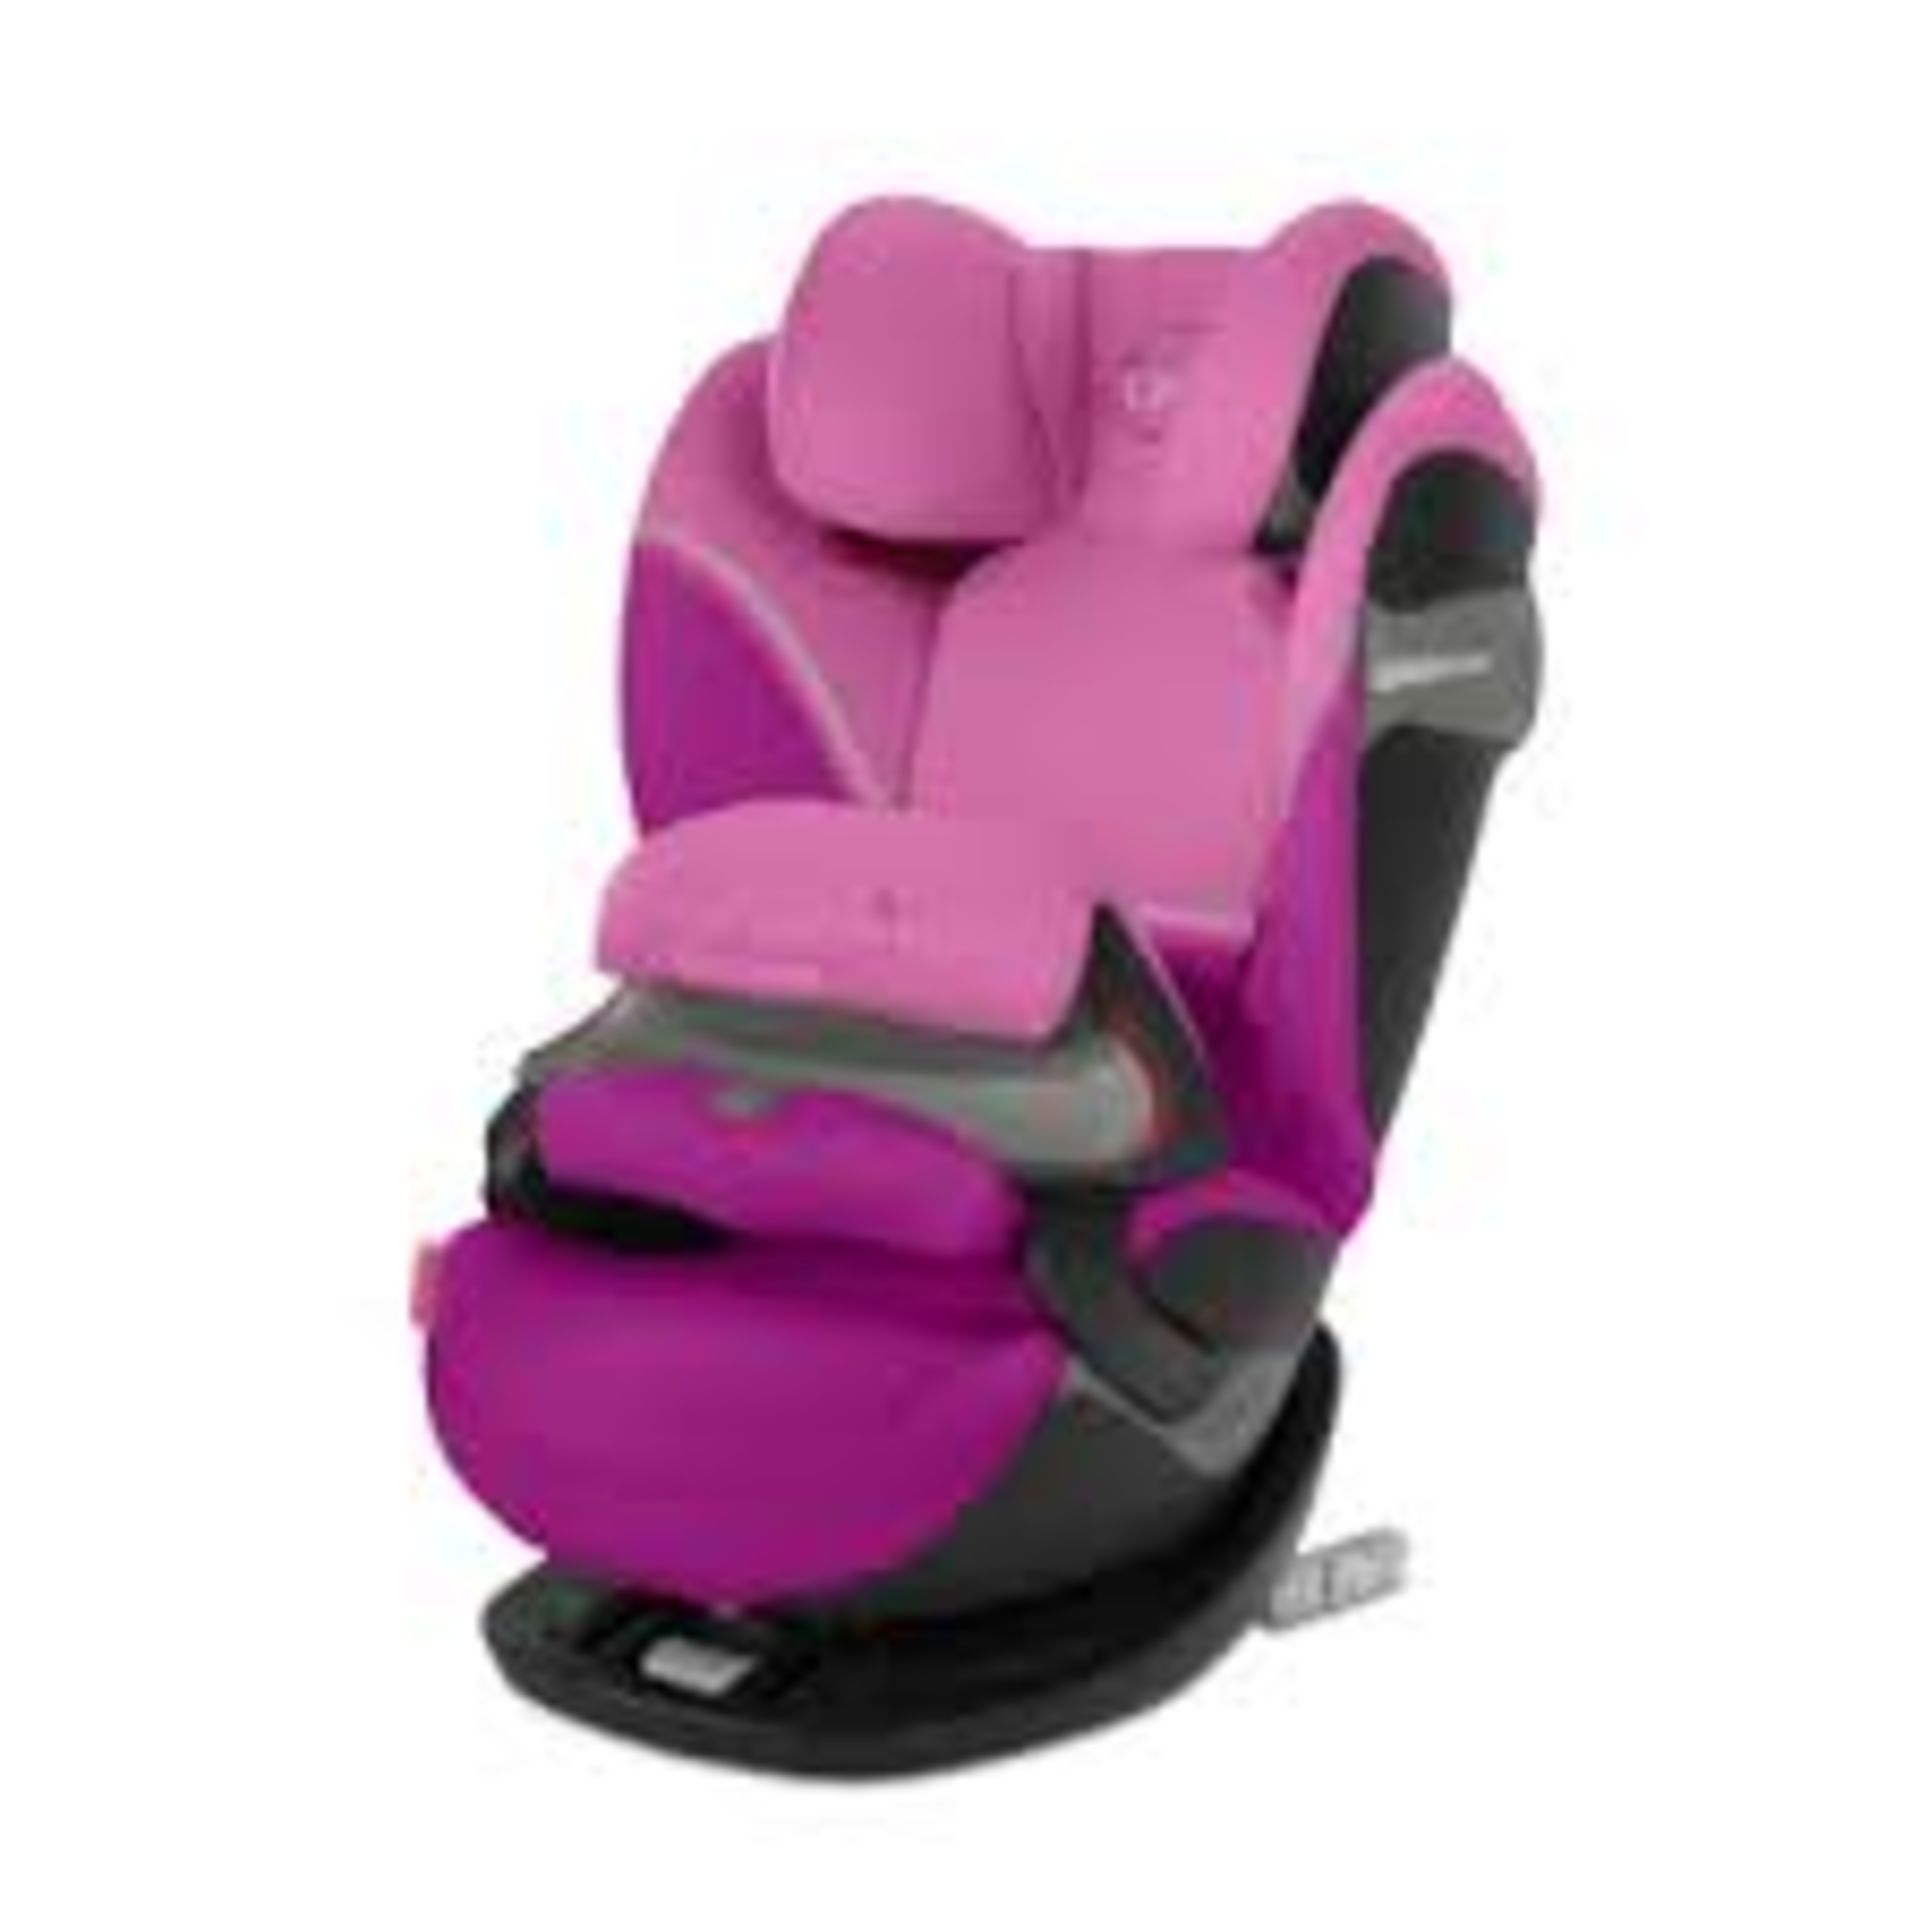 NEW BOXED CYBEX GOLD SIRONA S i-SIZE FANCY PINK/PURPLE CAR SEAT. RRP £299. ROW 3